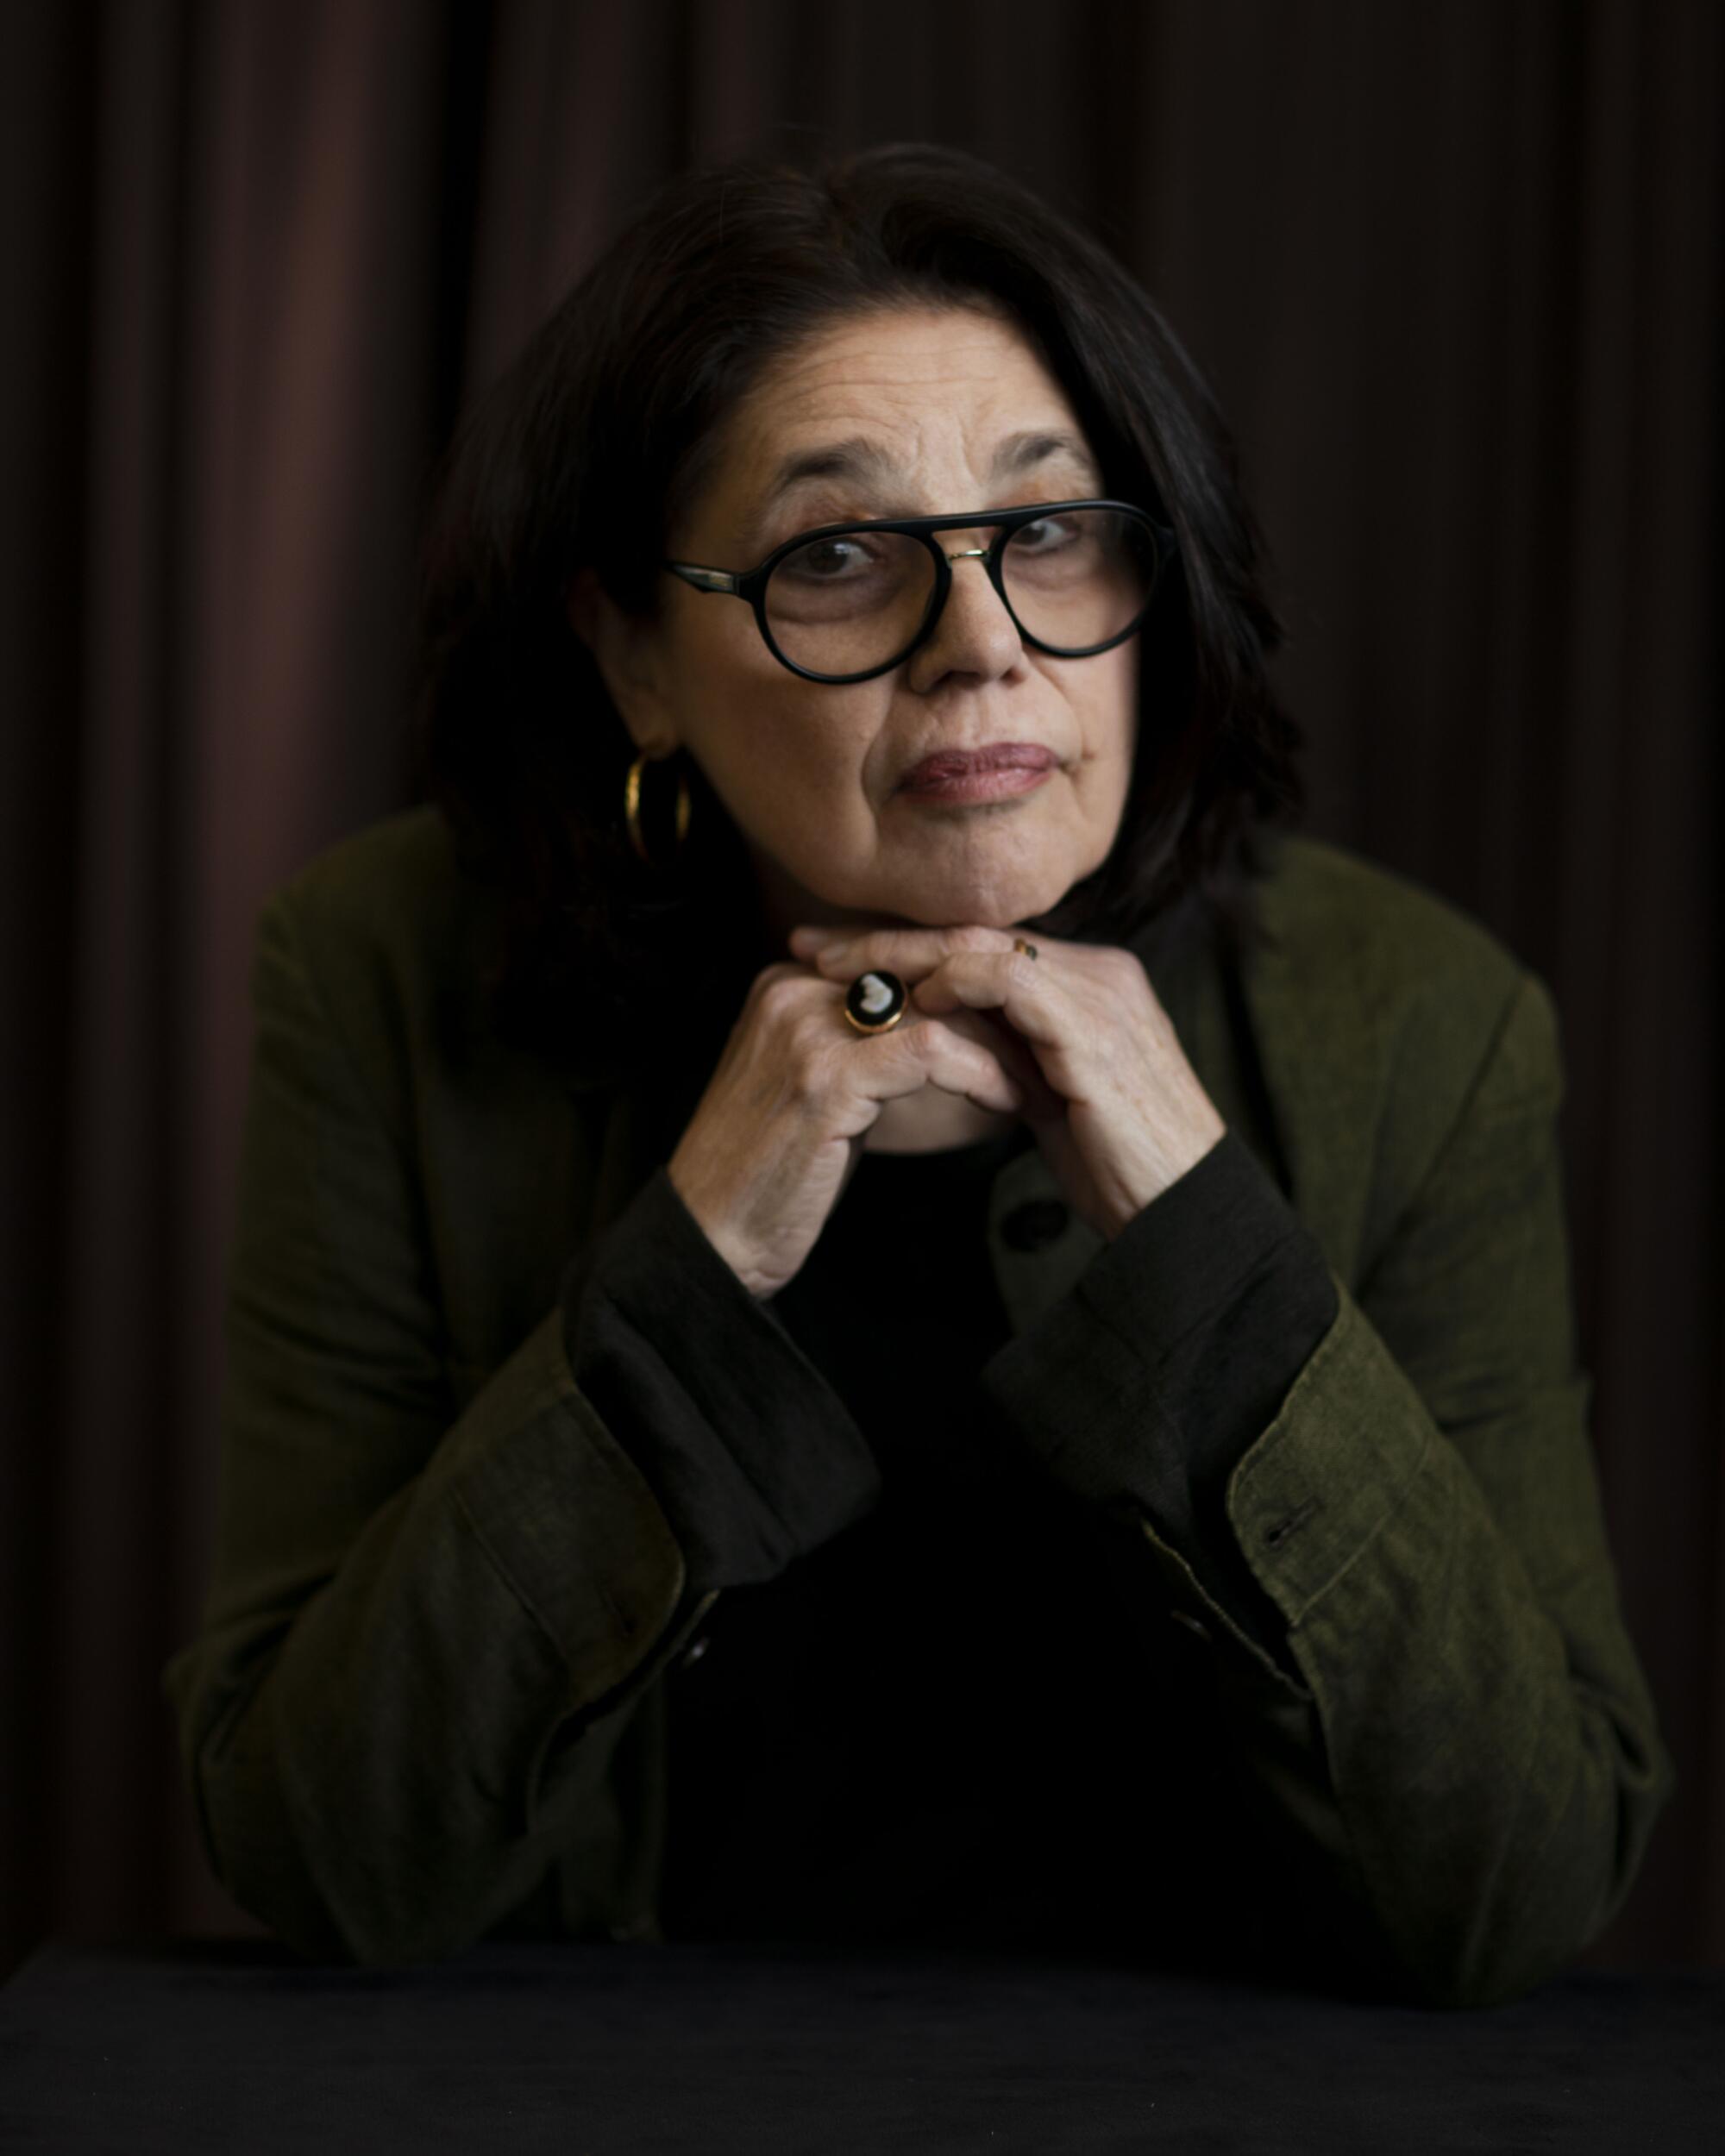 Cathleen Schine at the Los Angeles Times Festival of Books portrait studio.